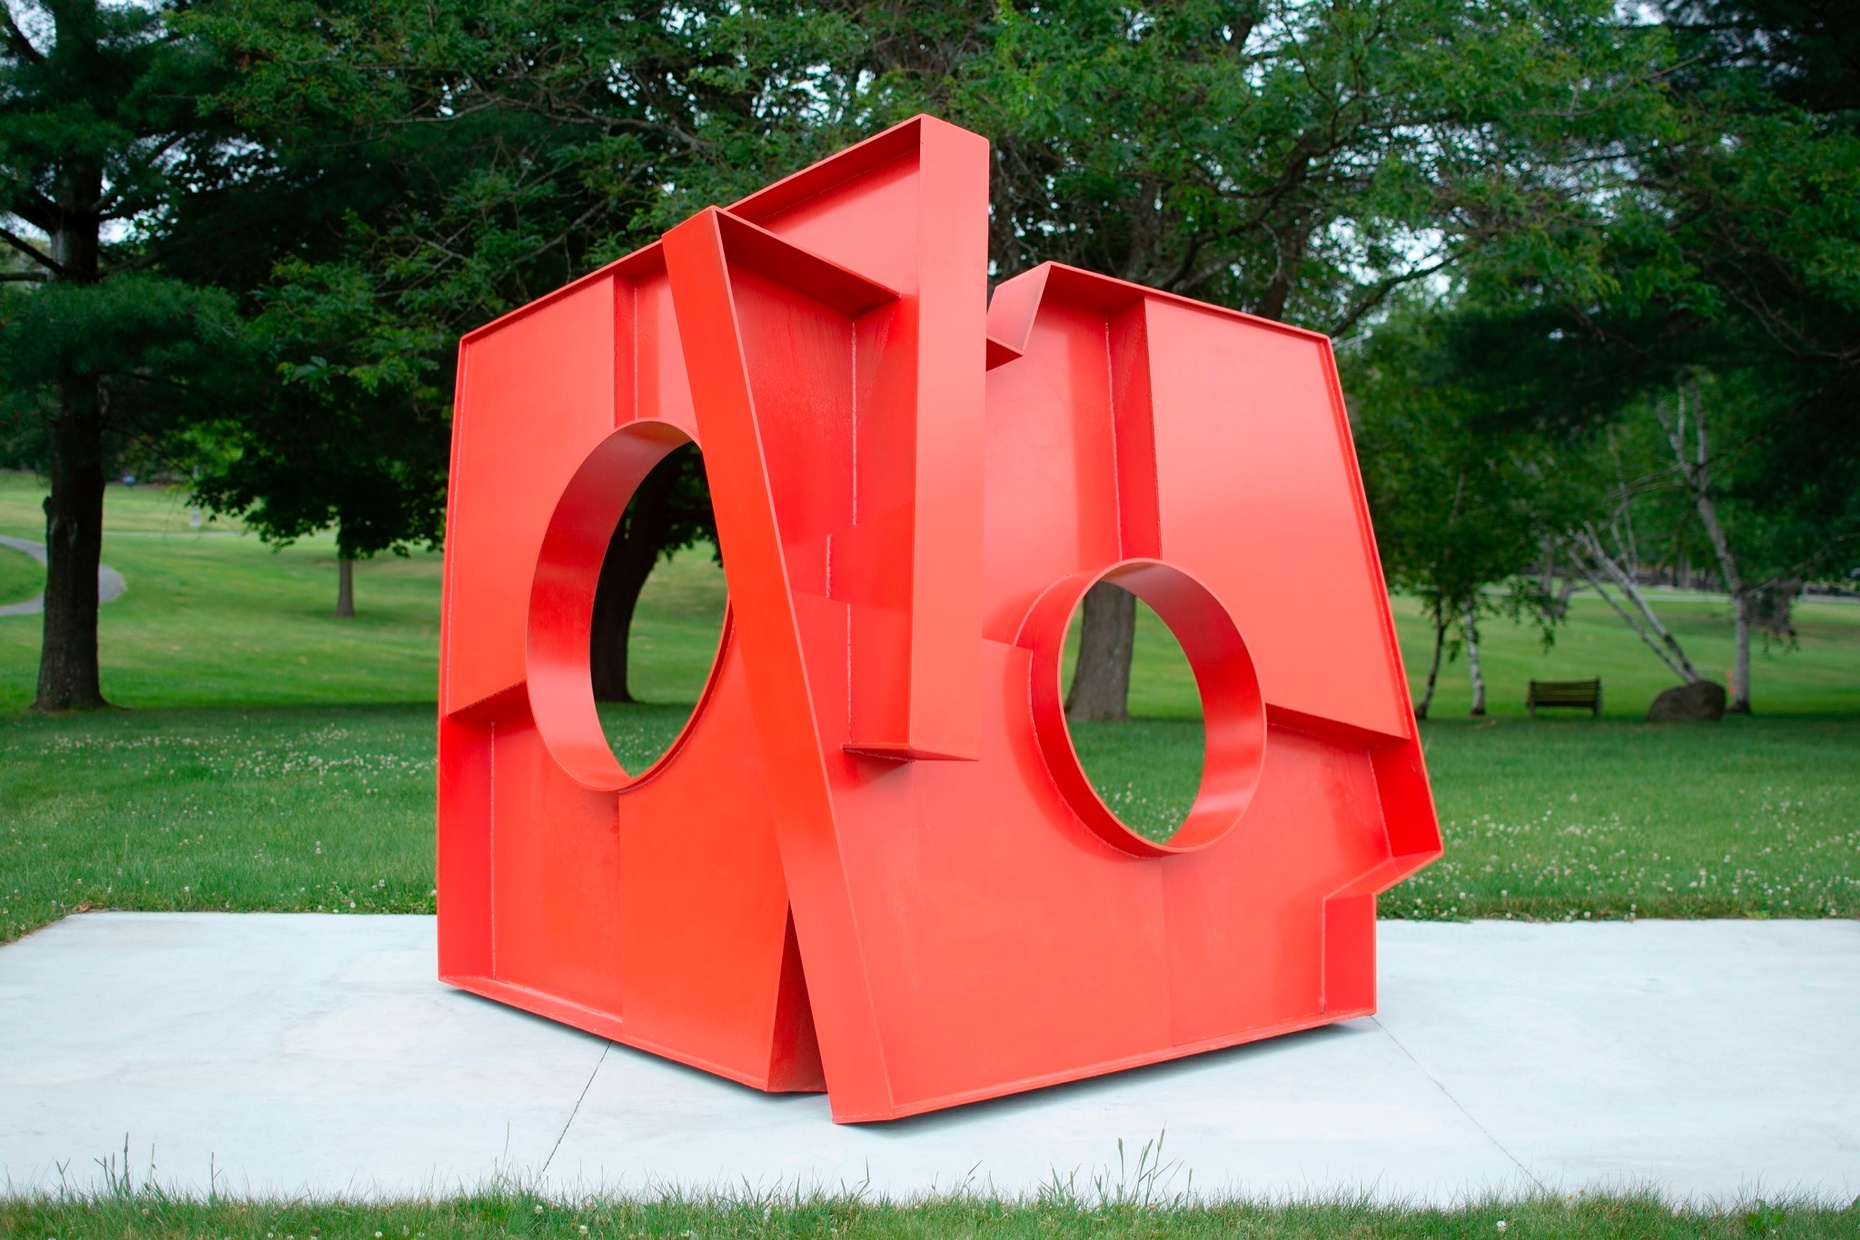 A large, red sculpture of two rectangular shapes conjoined at an angle with large holes in the middle of each plane sits on a concrete slab in a grassy field with trees.